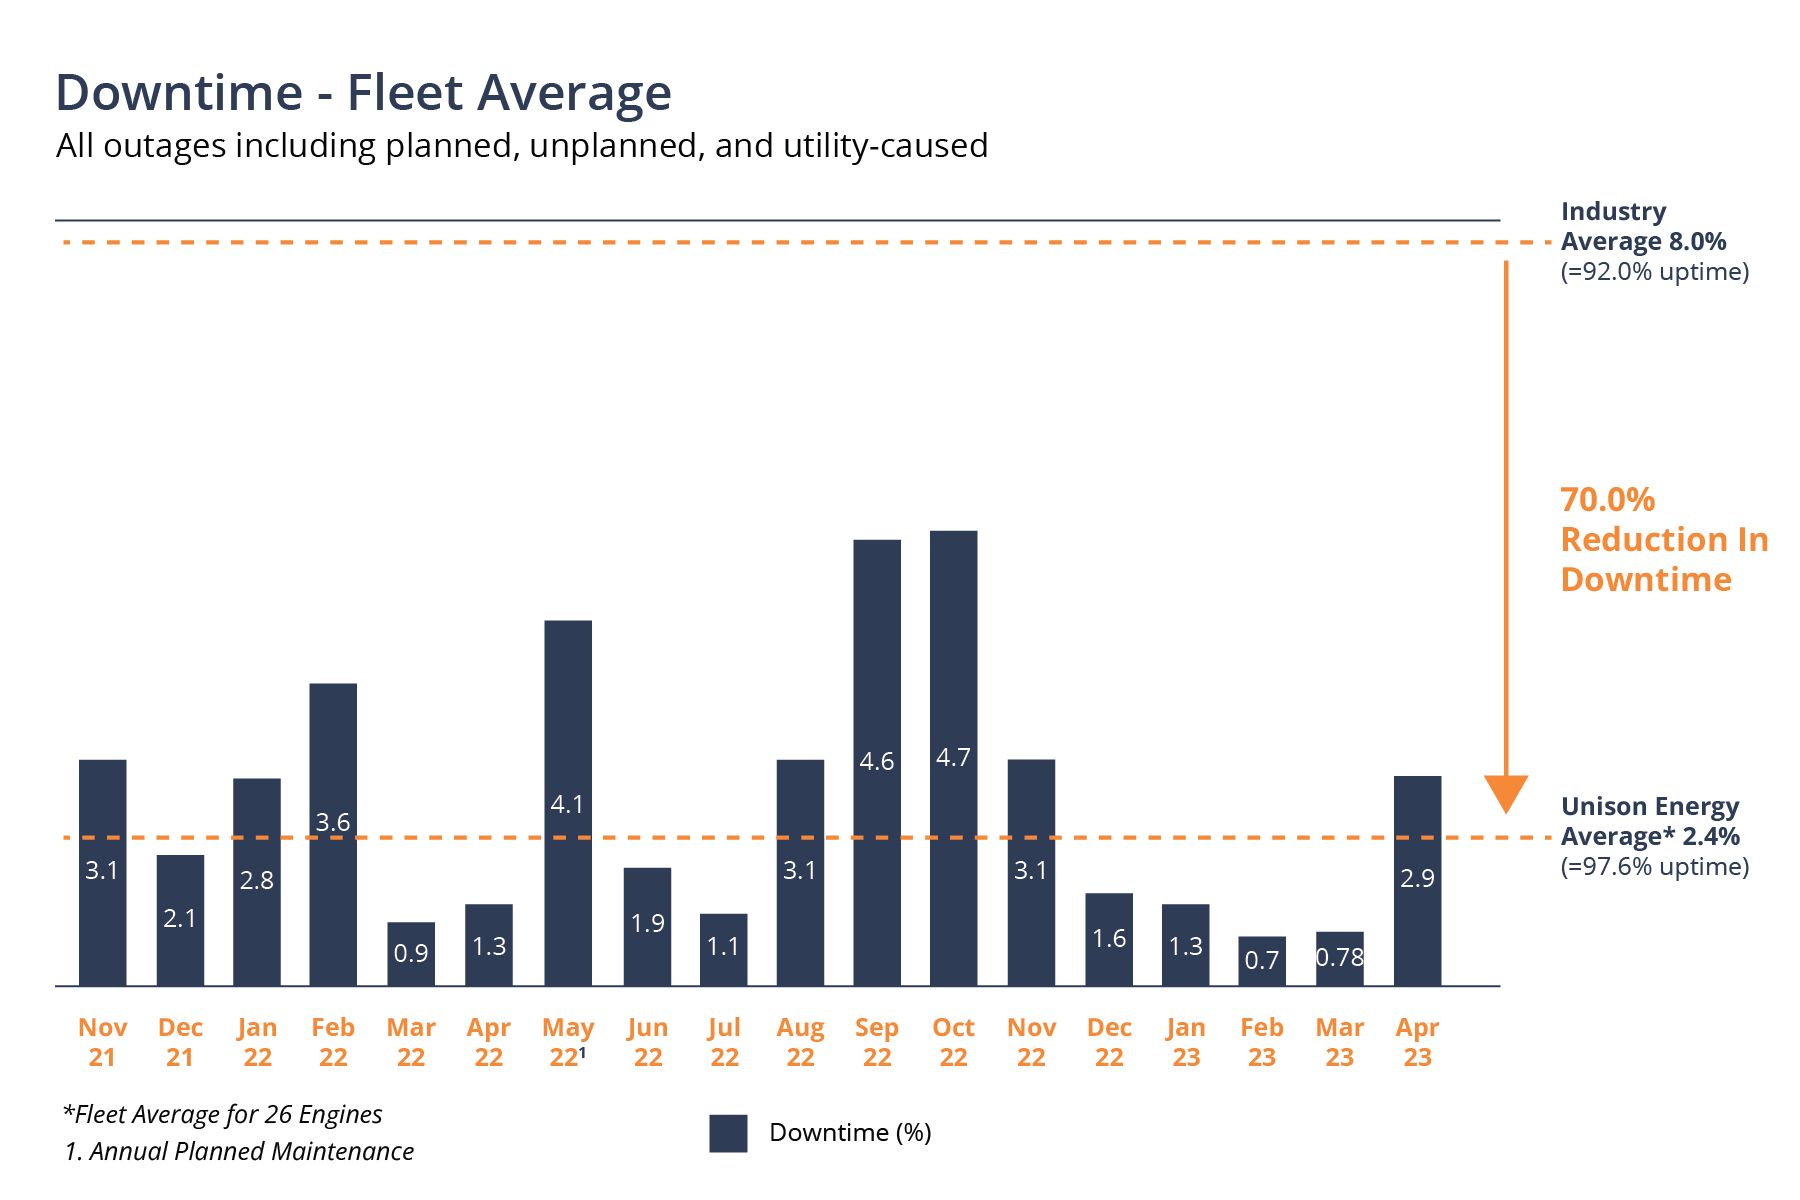 Downtime of systems, fleet average across 18 months